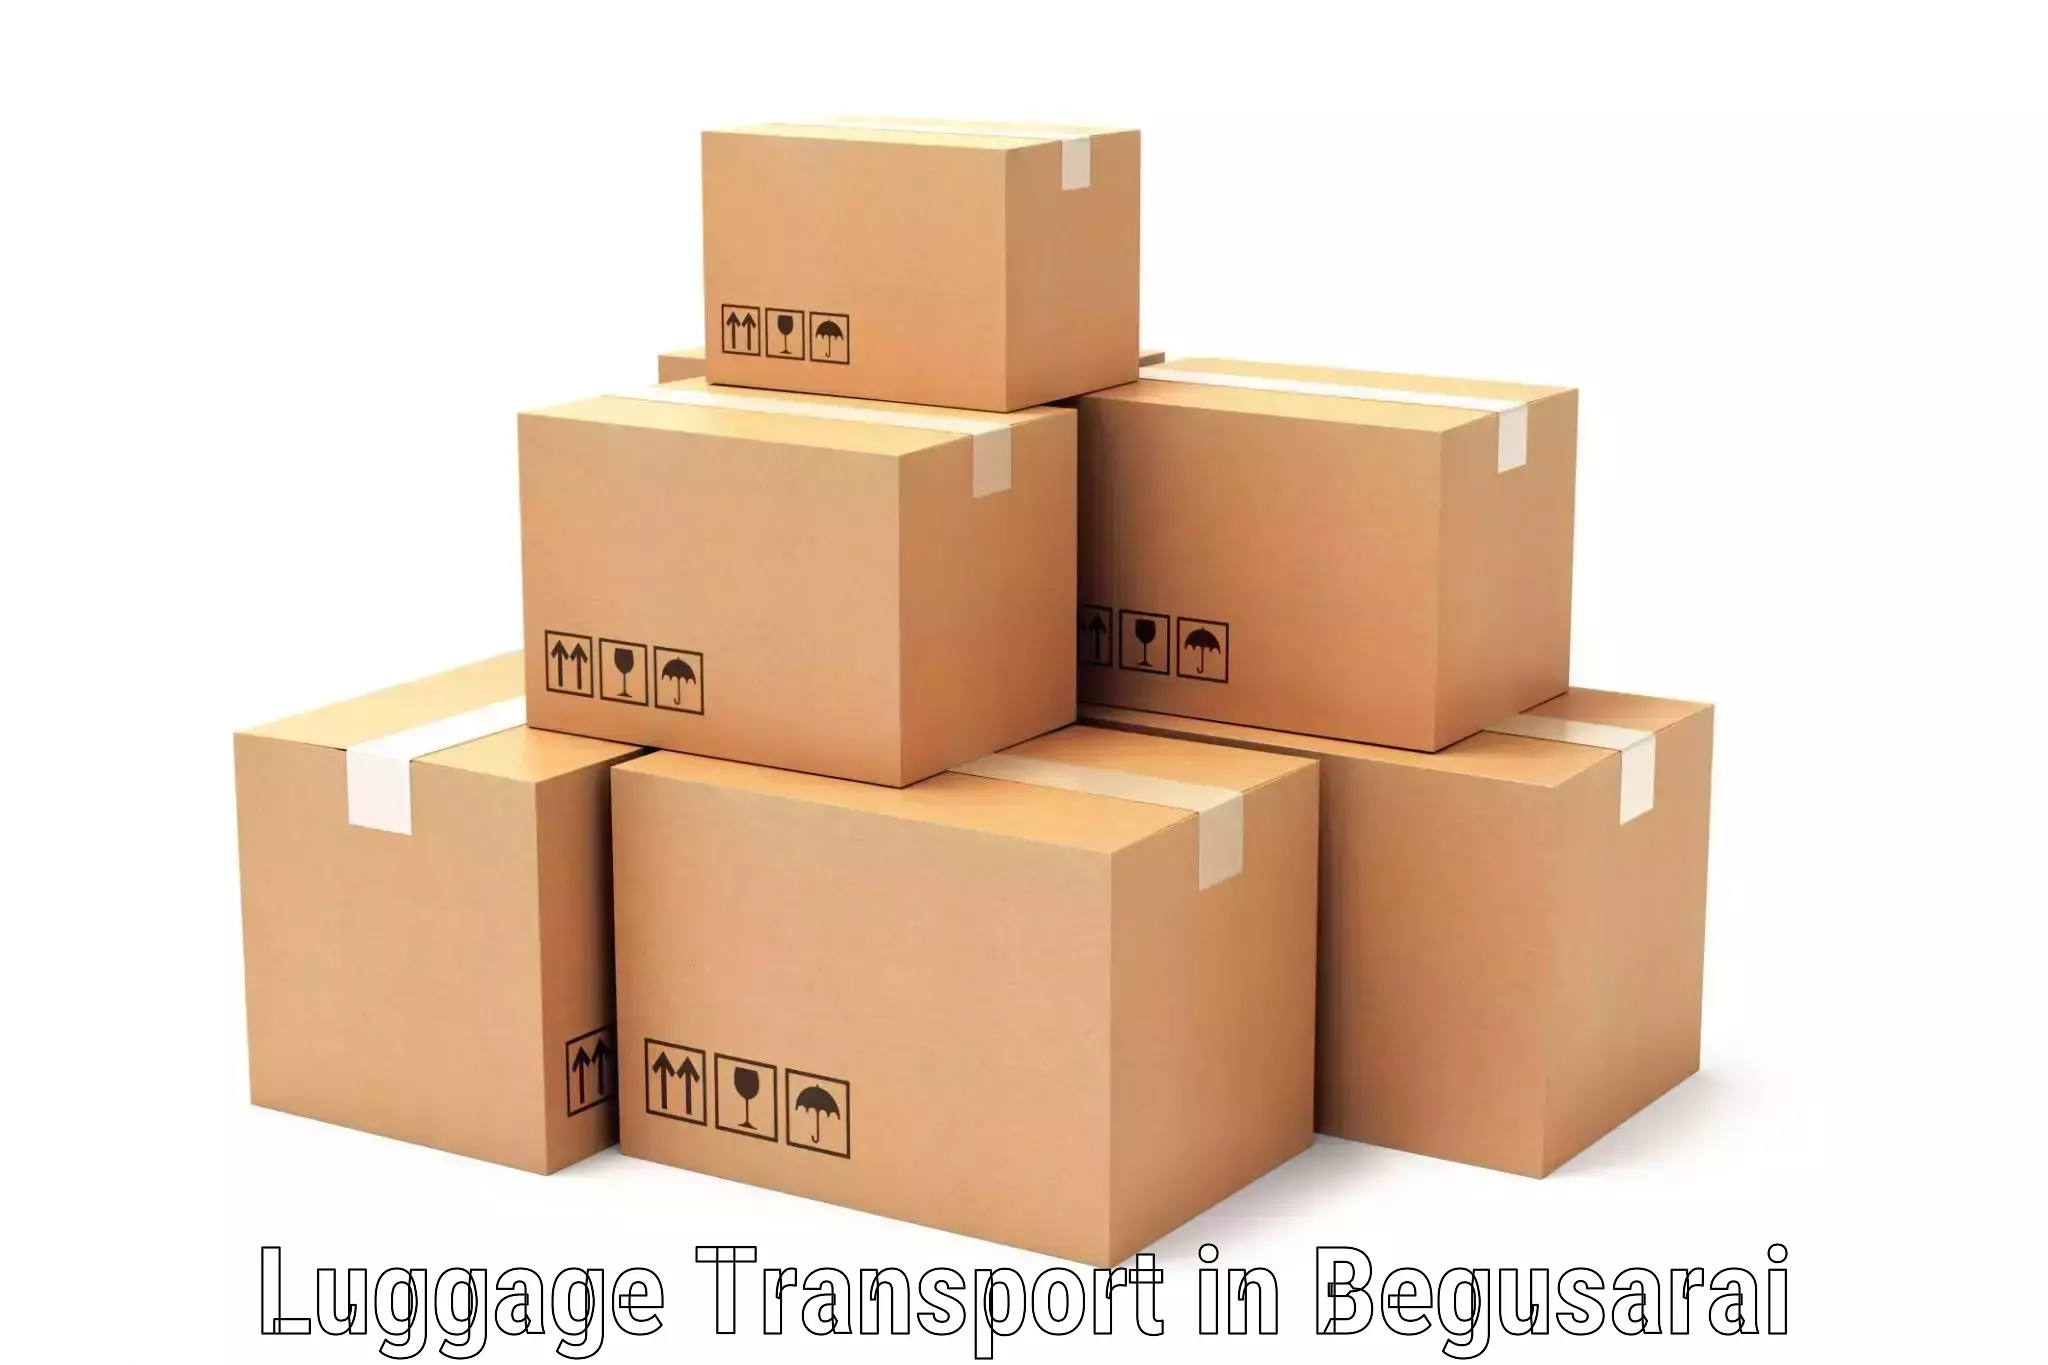 Business luggage transport in Begusarai